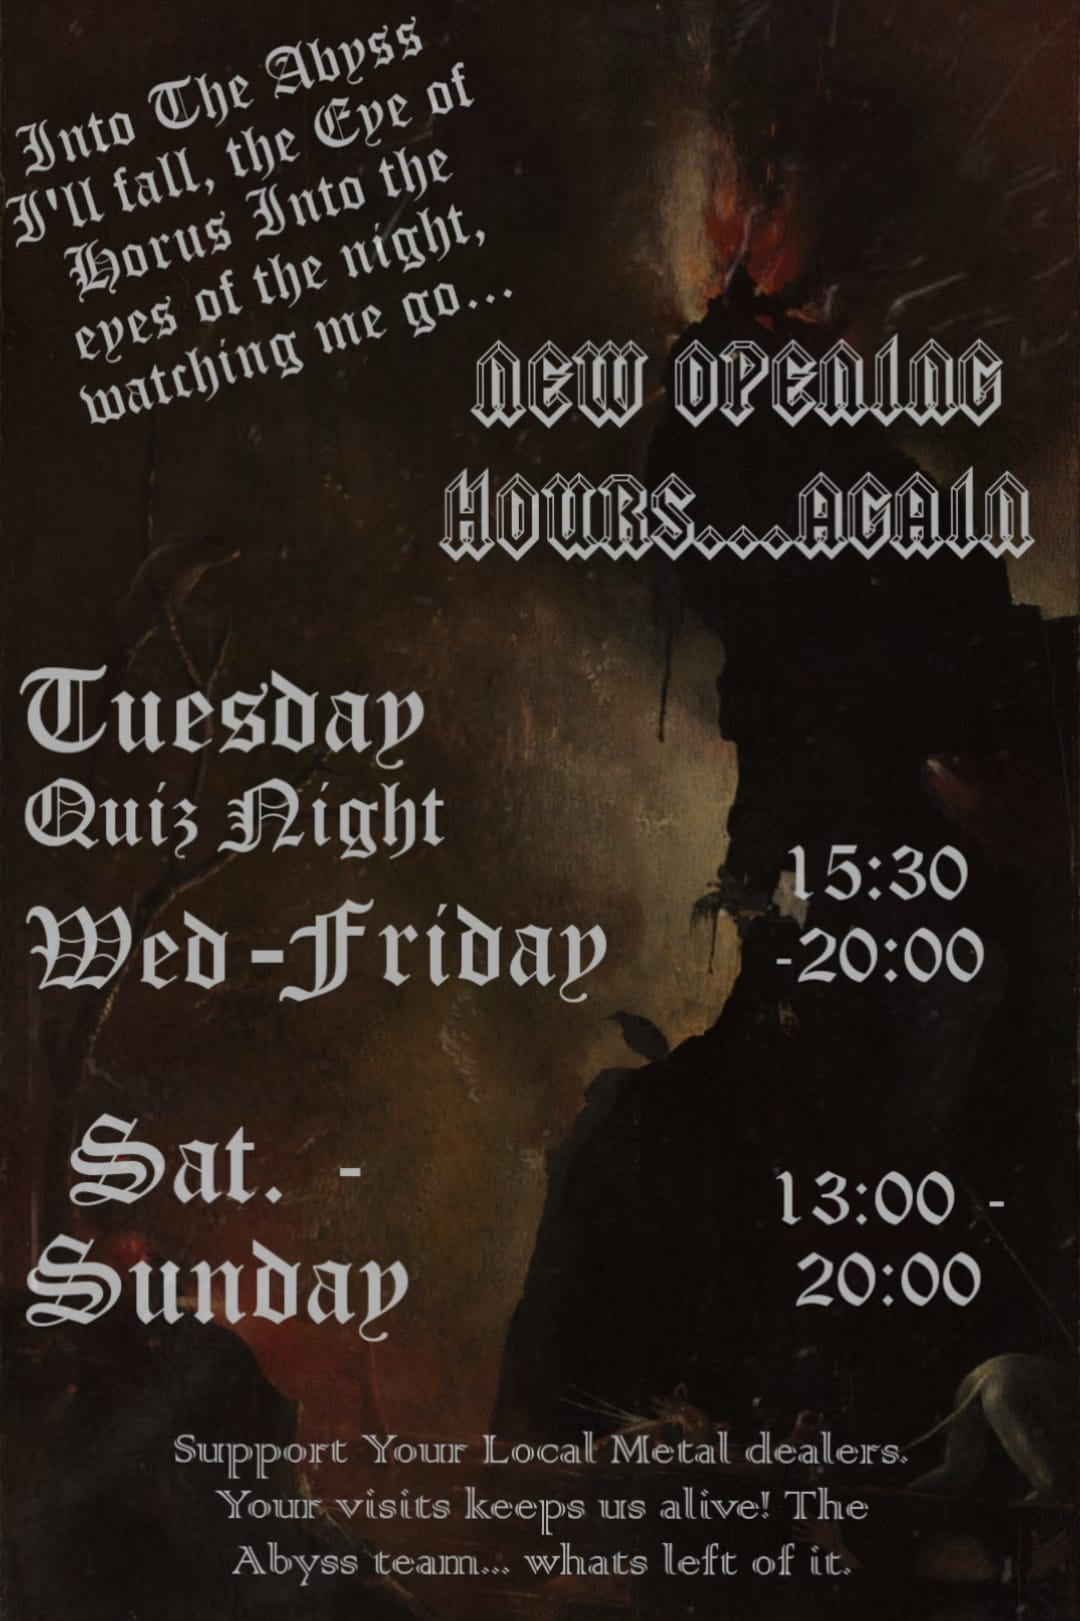 The Abyss Bar - New Opening Times after COVID19 restrictions